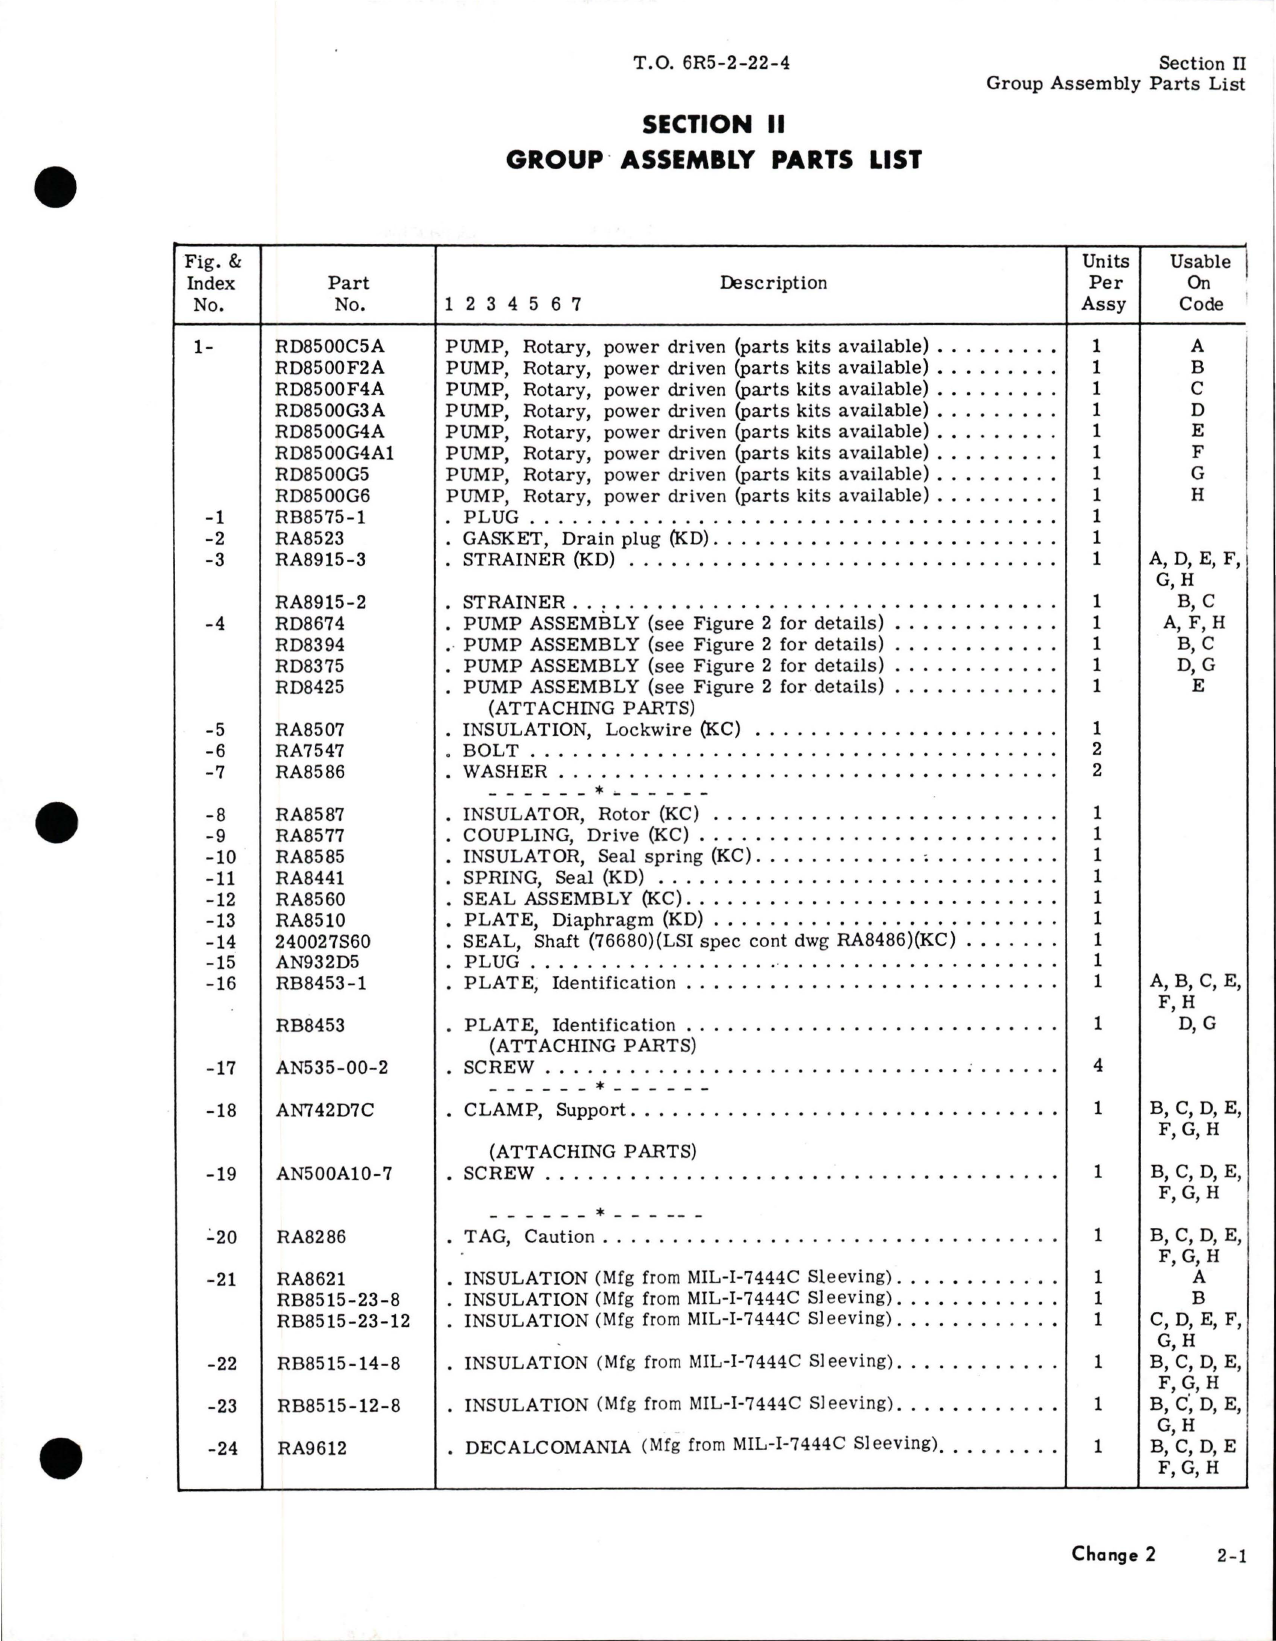 Sample page 7 from AirCorps Library document: Illustrated Parts Breakdown for Water Injection Pump - Model RD8500 Series 